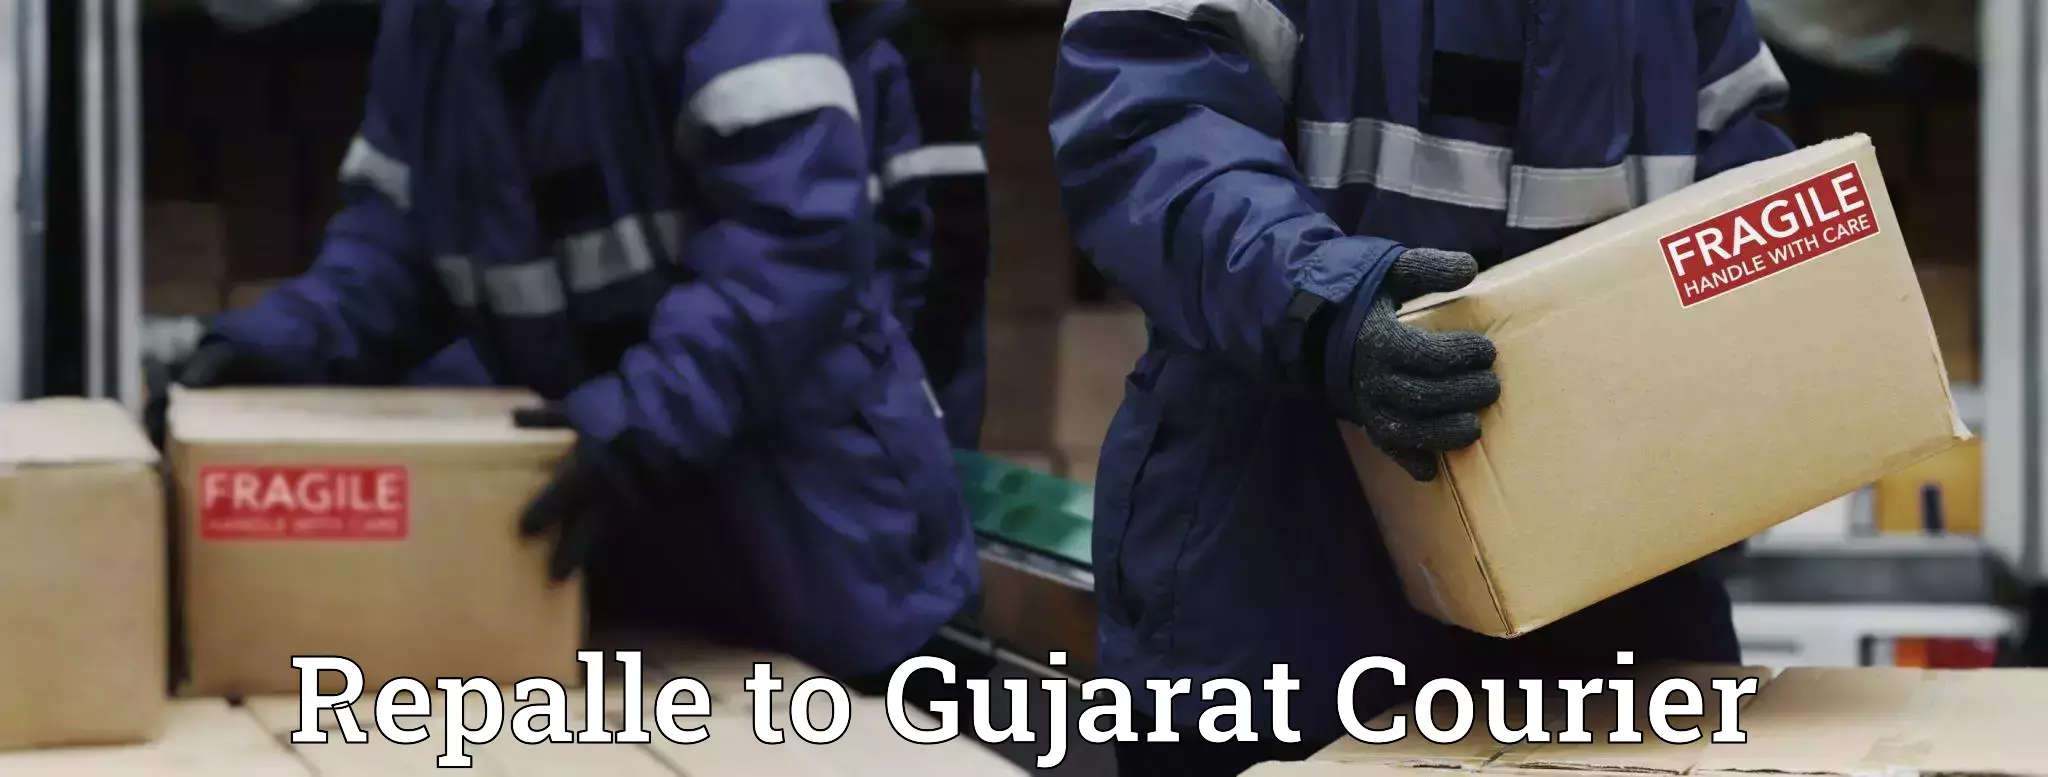 Ocean freight courier Repalle to Gujarat